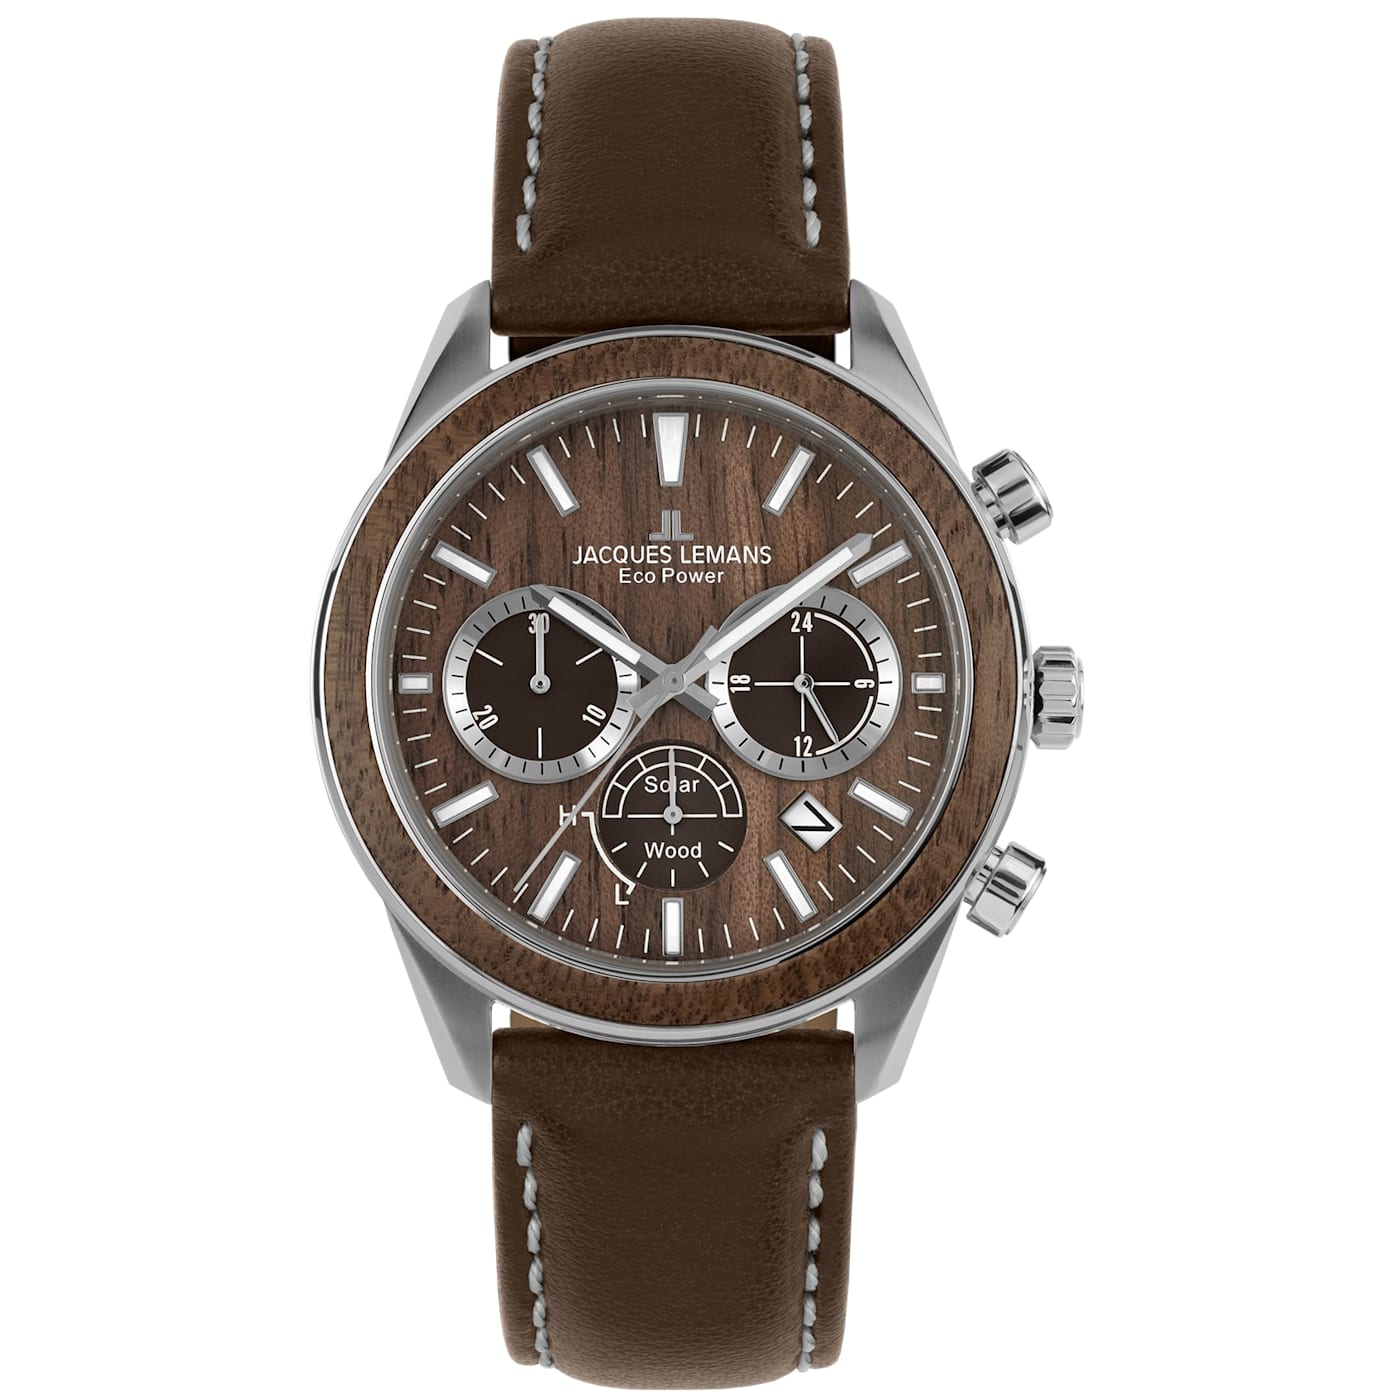 JACQUES LEMANS Eco Power Men's Watch w/Vegan Leather Band and Stainless  Strap, Chronograph 1-2115 - 155Z3A